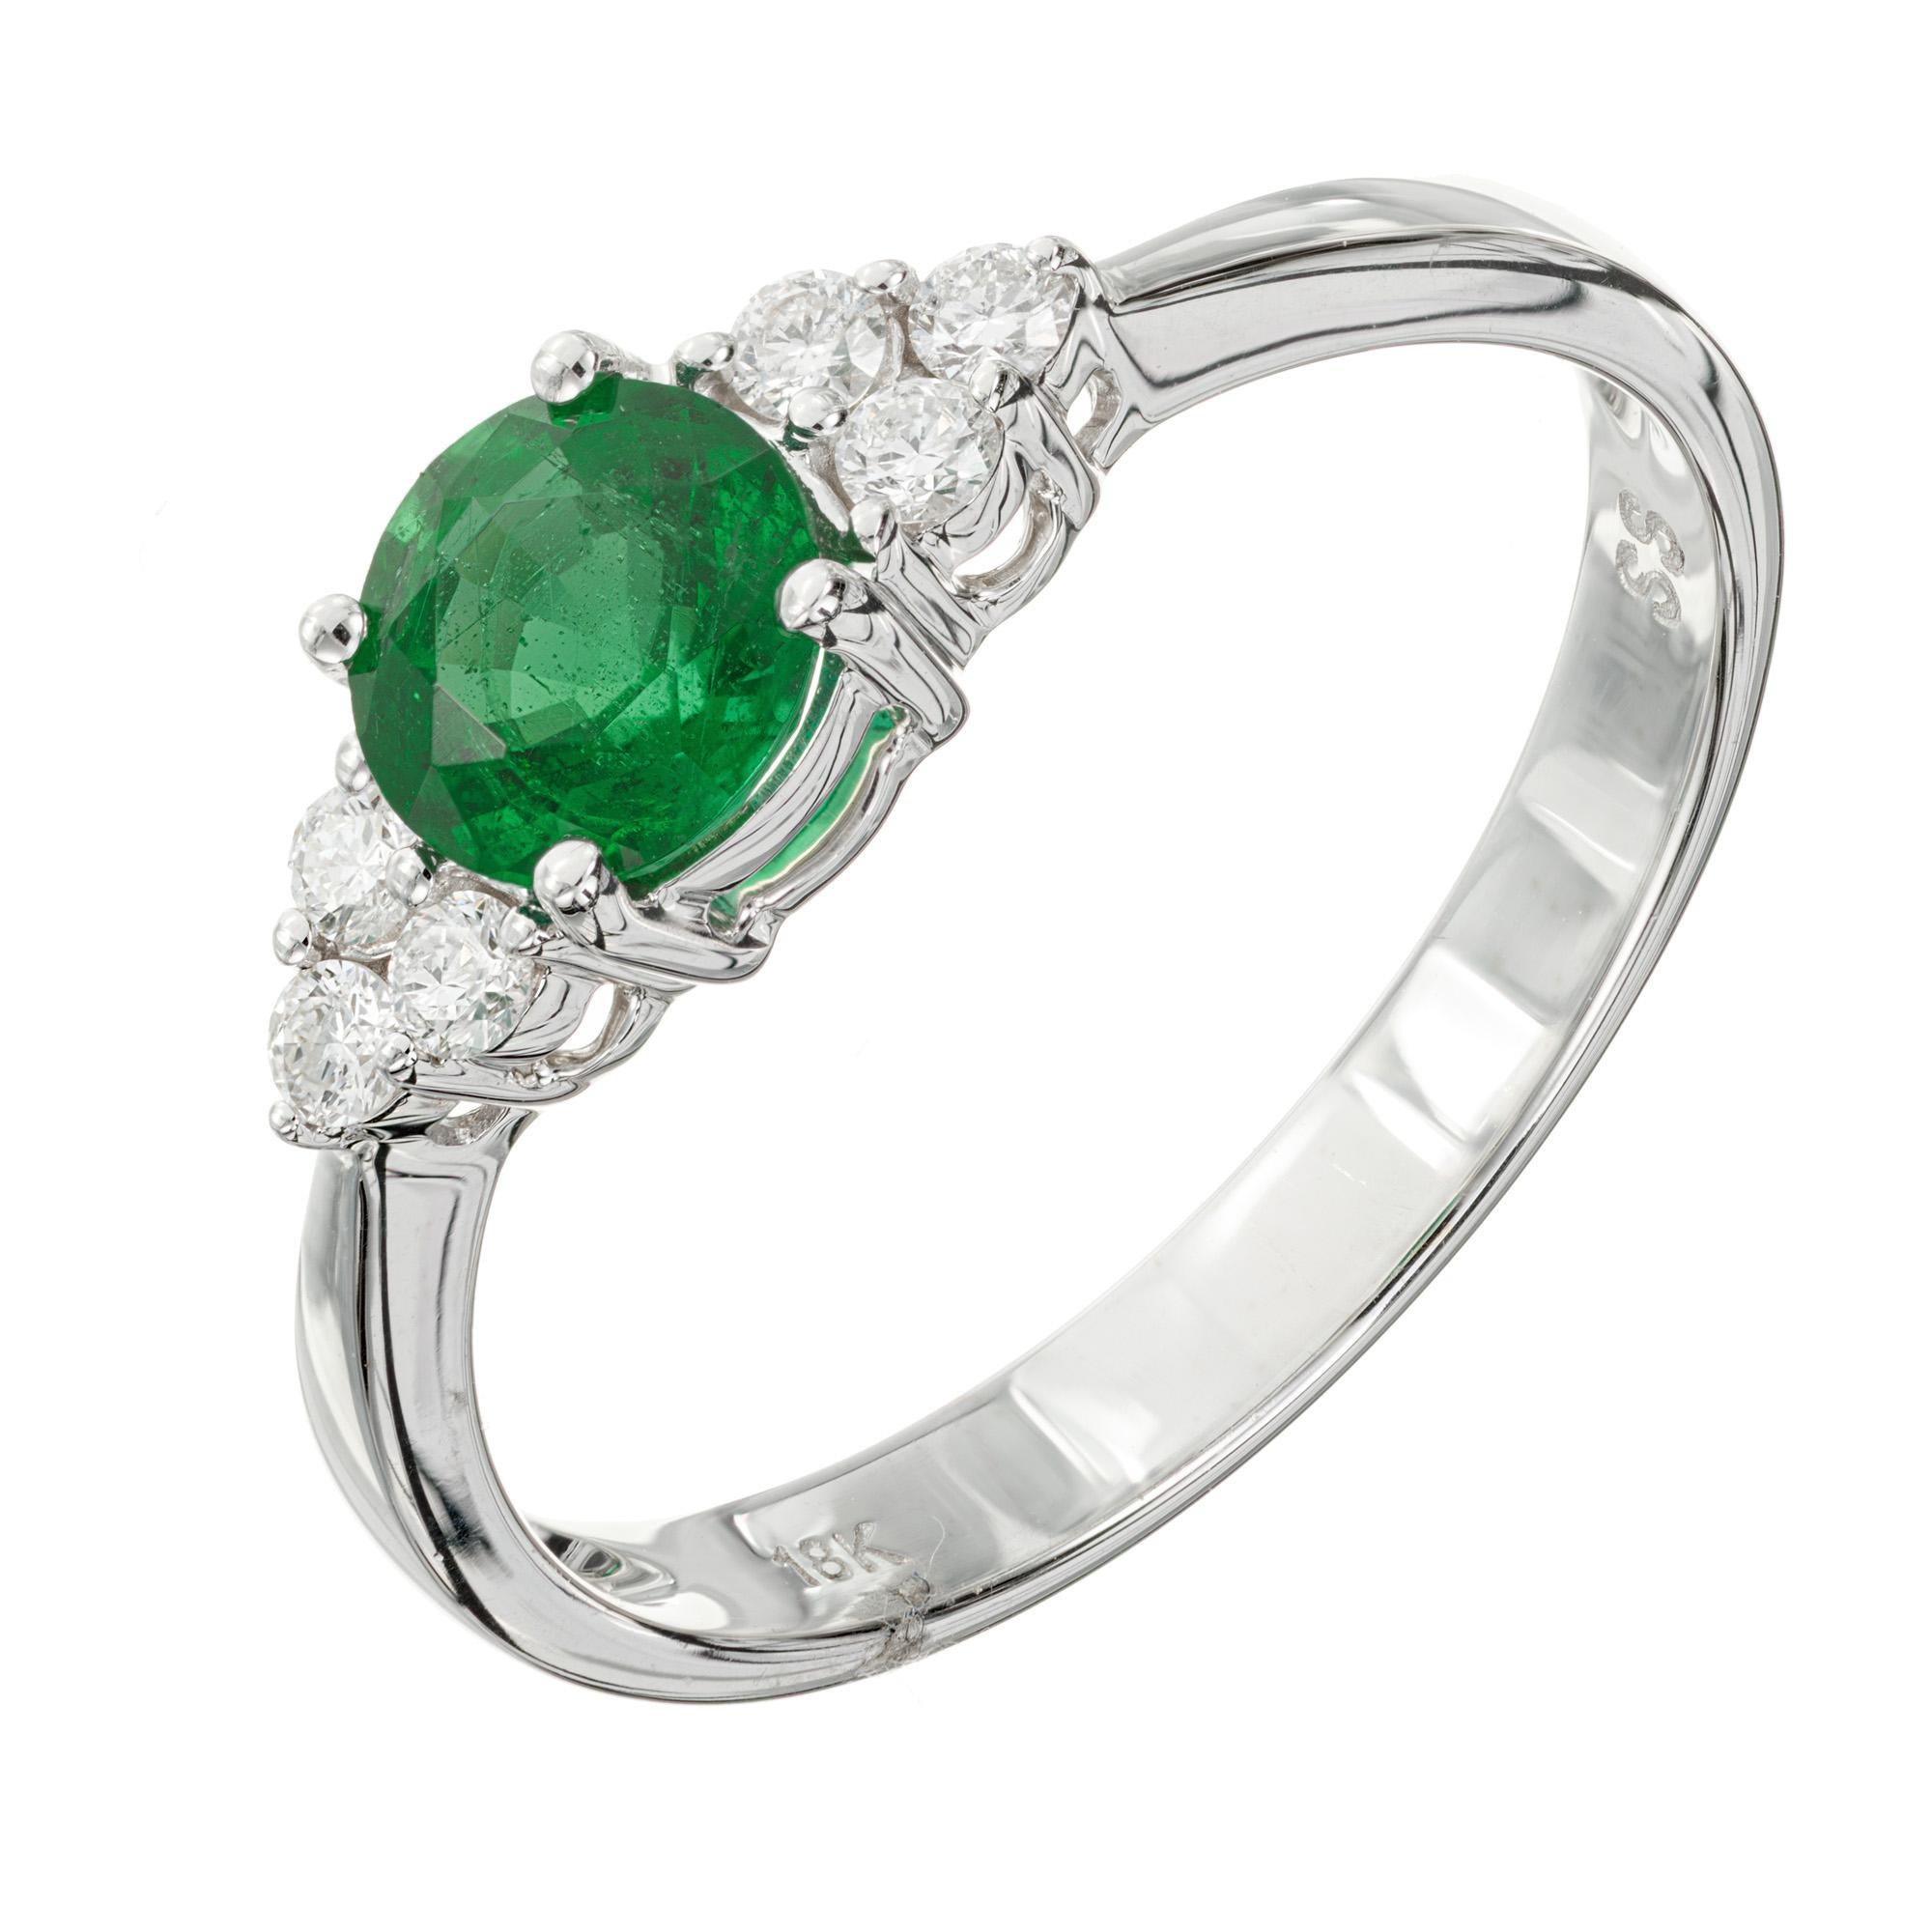 Emerald and diamond engagement ring. Bright green .57 carat round natural emerald center stone. 18k white gold setting with 3 round diamonds on each side. Designed and crafted in the Peter Suchy Workshop.

1 round green emerald, approx. .57cts
6